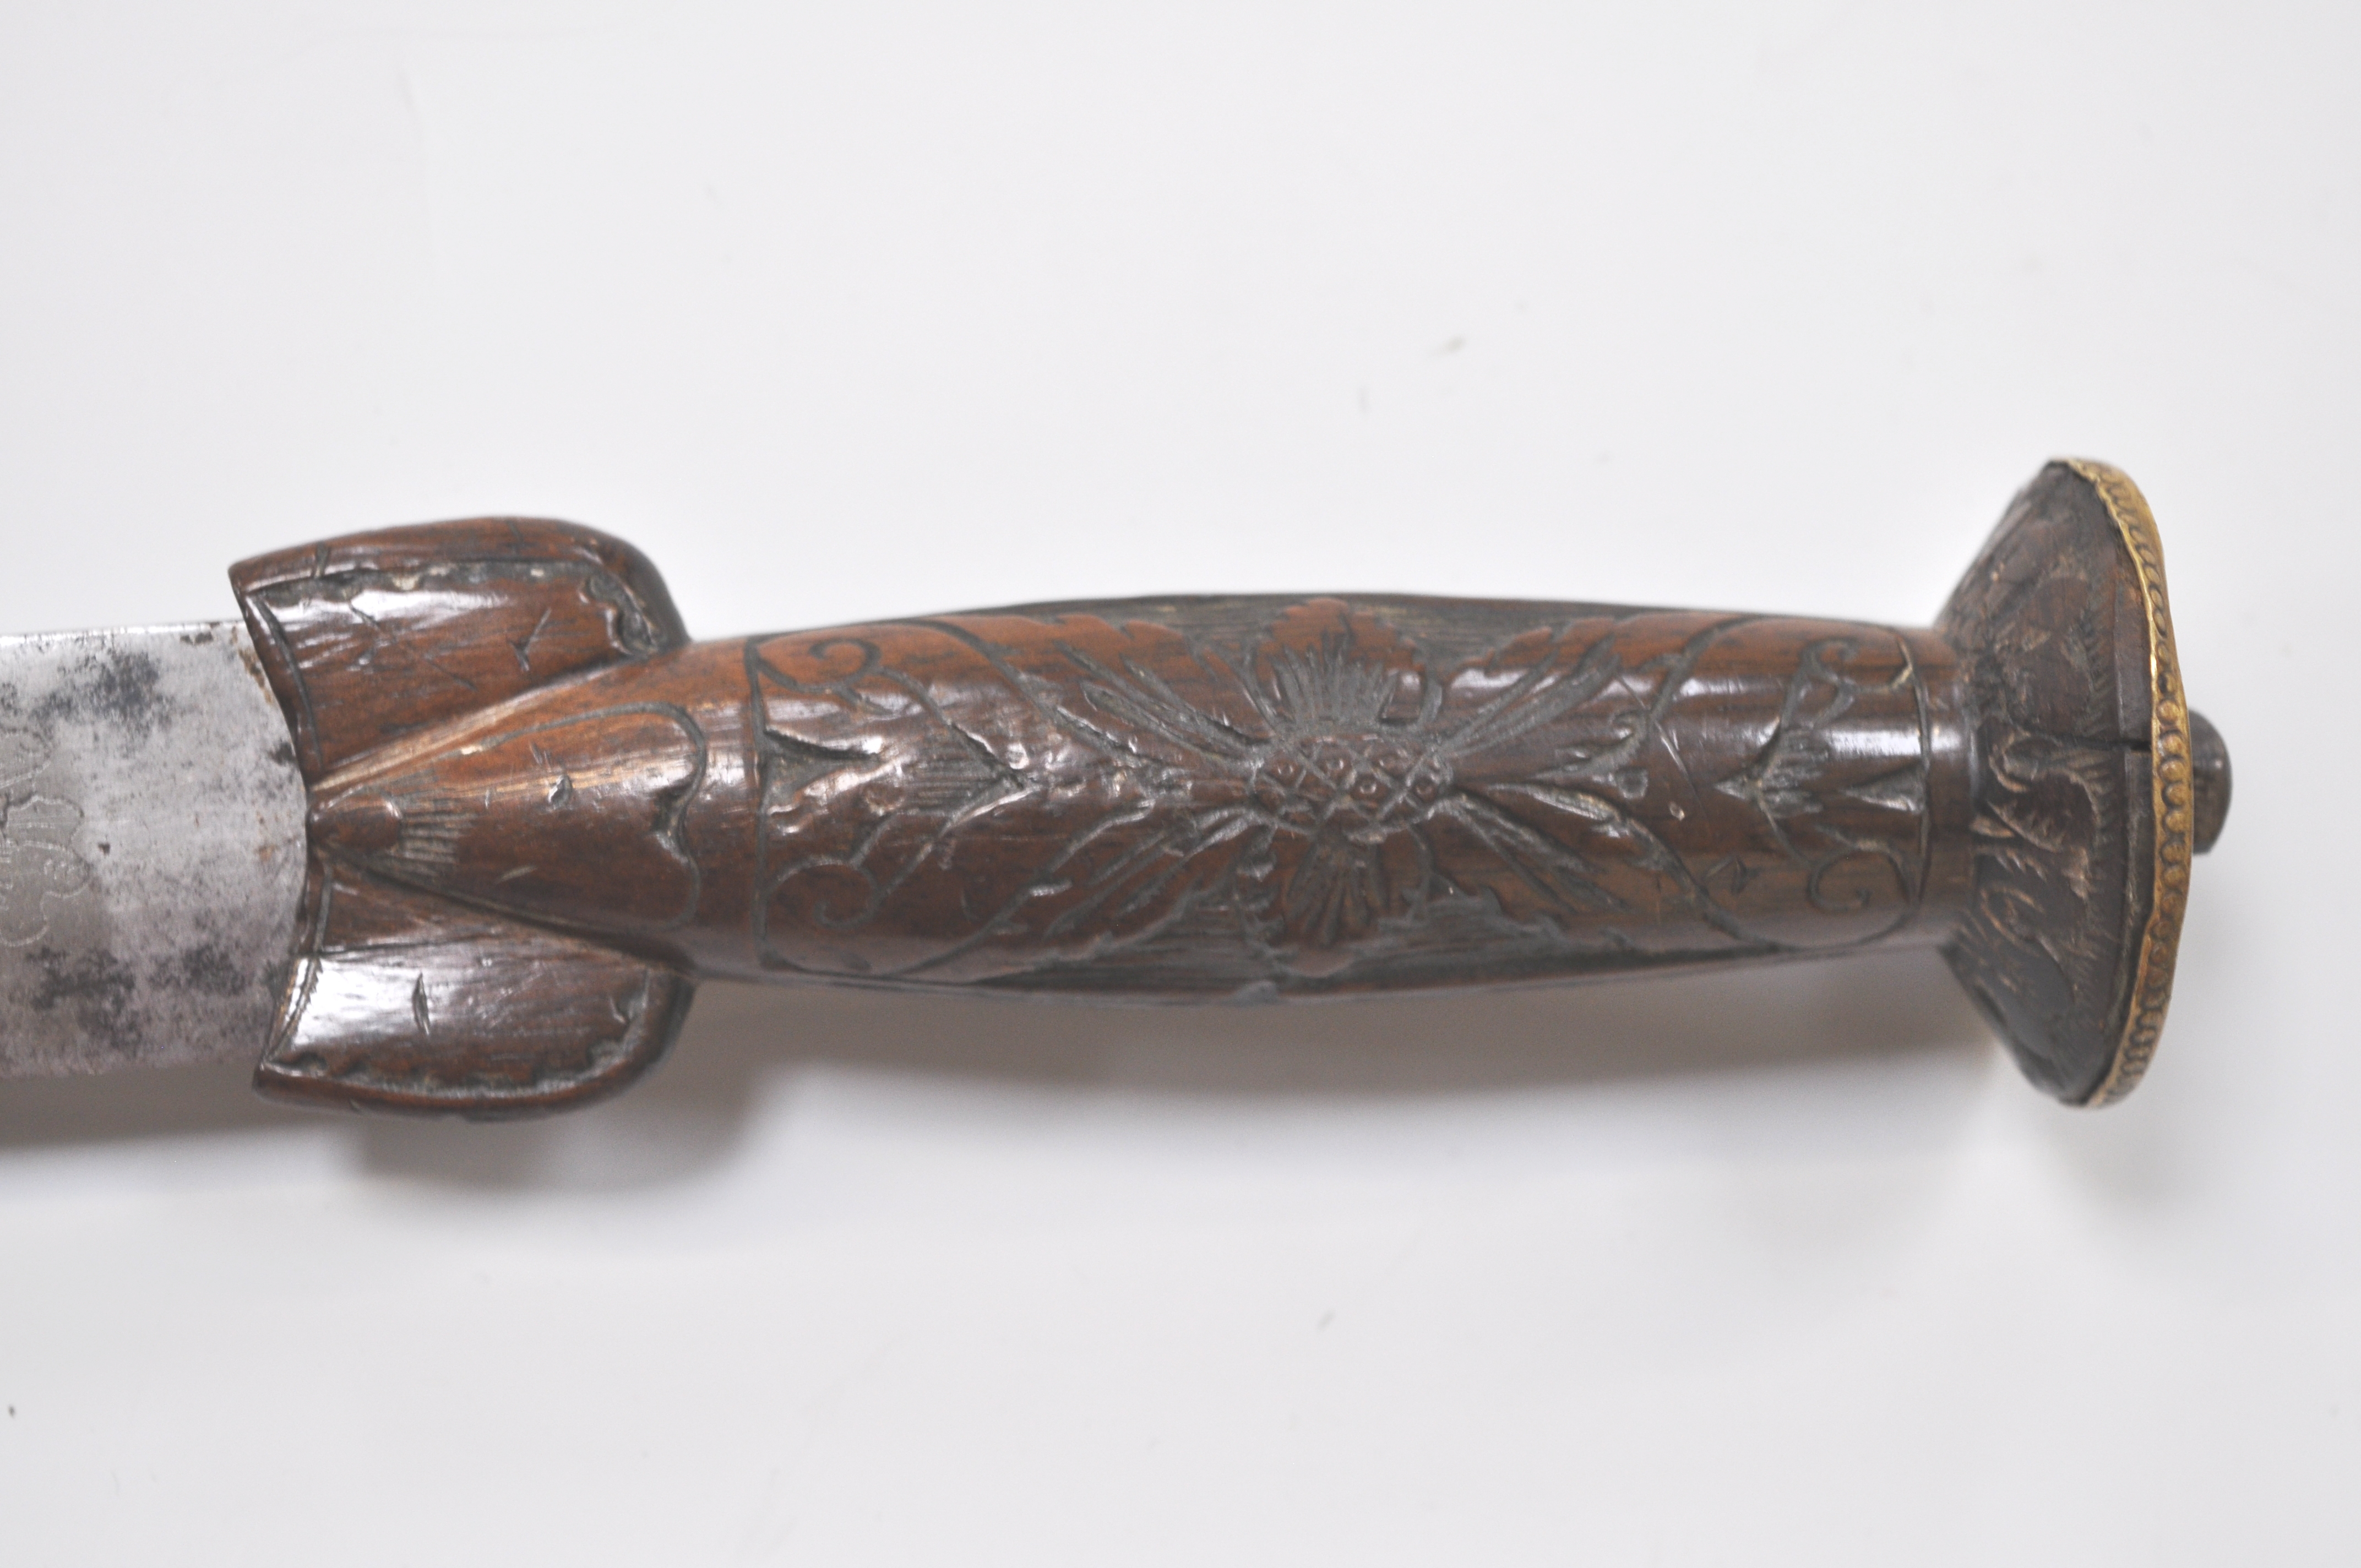 'Jacobite' Dirk, 39cms blade engraved "Prosperity to Scotia" and "No Union", - Image 7 of 9